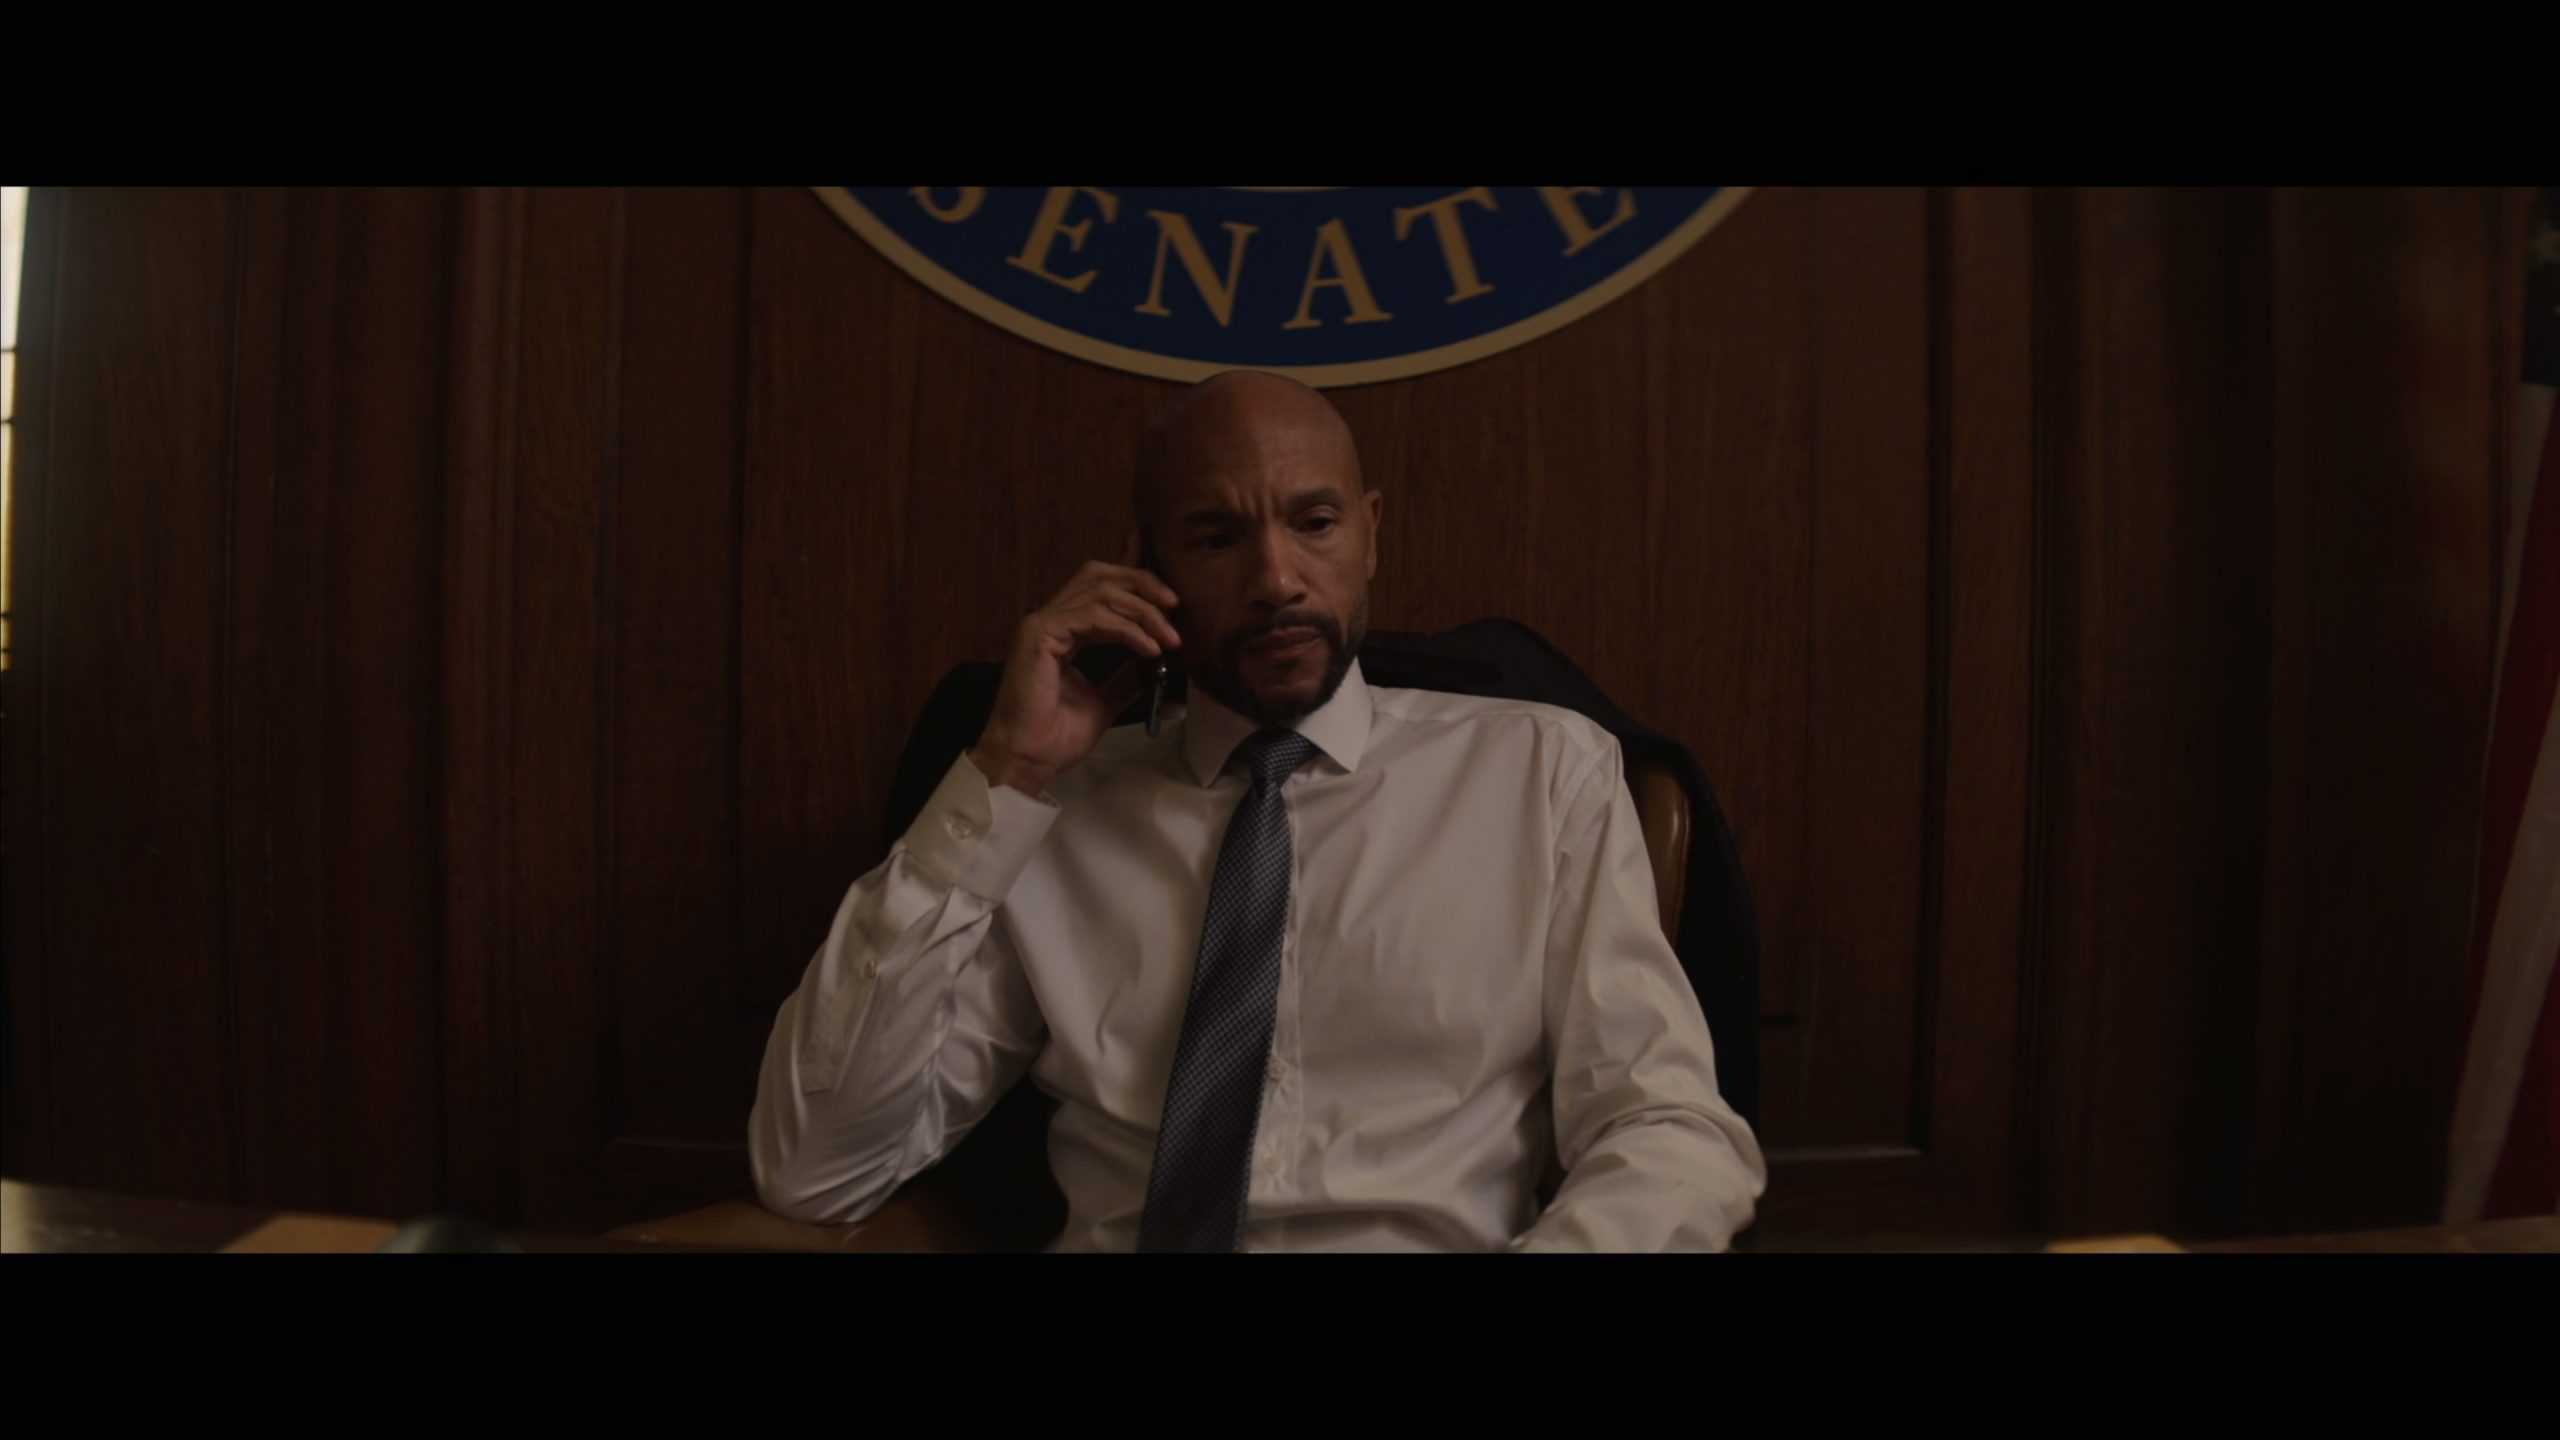 Senator Grant Powell (Stephen Bishop) getting a call from Xavier